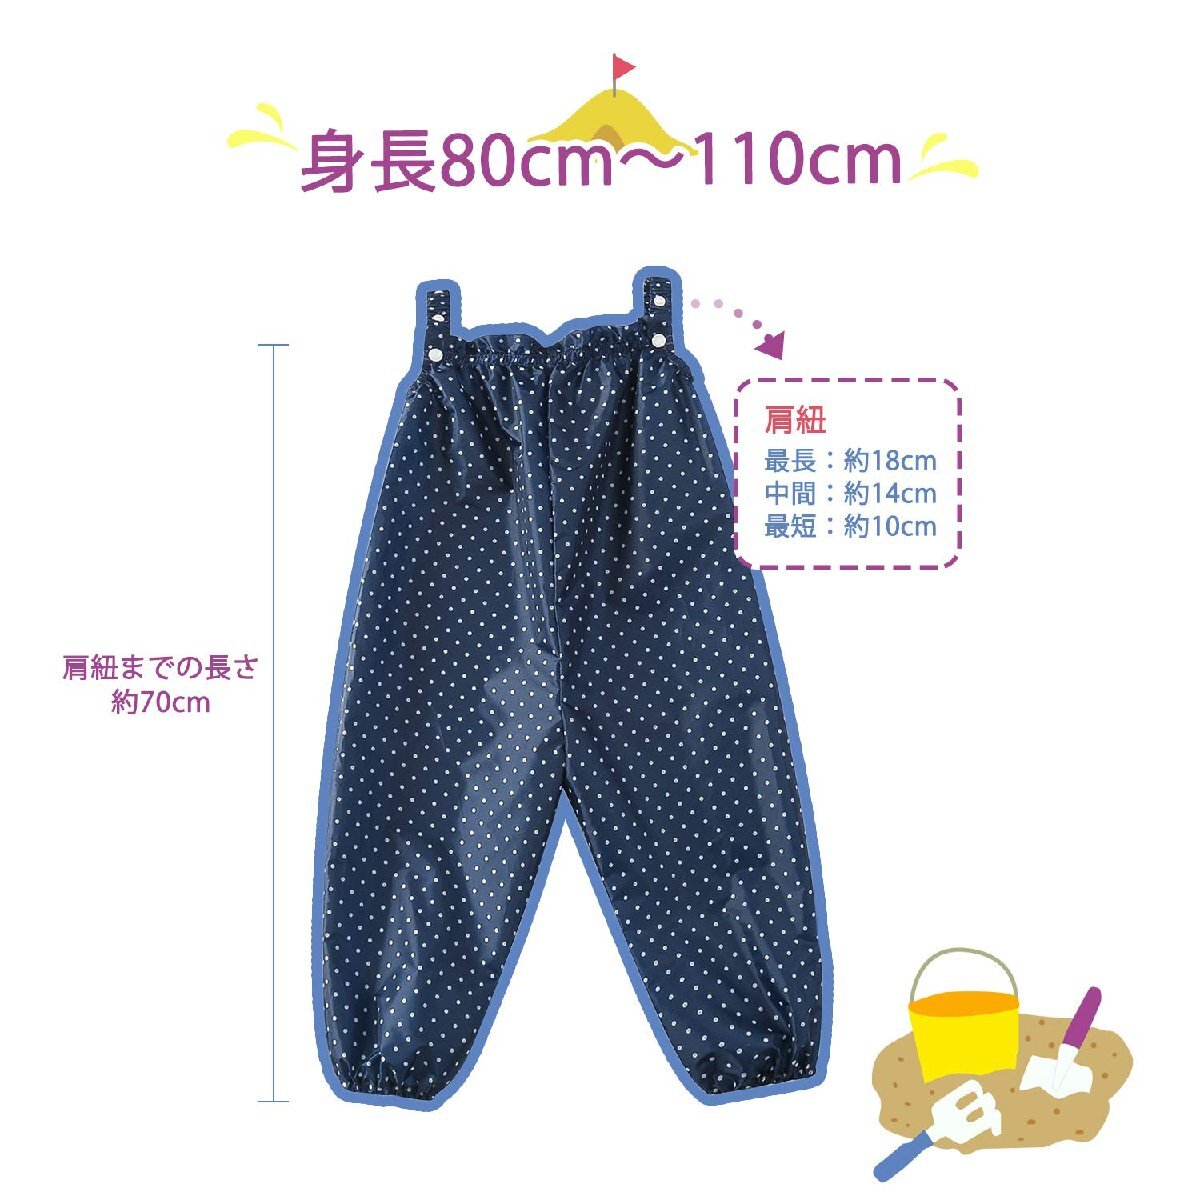 [Litchii Guusii] Play wear . sand place put on adjustment possibility playing put on baby Kids 80cm - 110cm correspondence polka dot pattern overall .